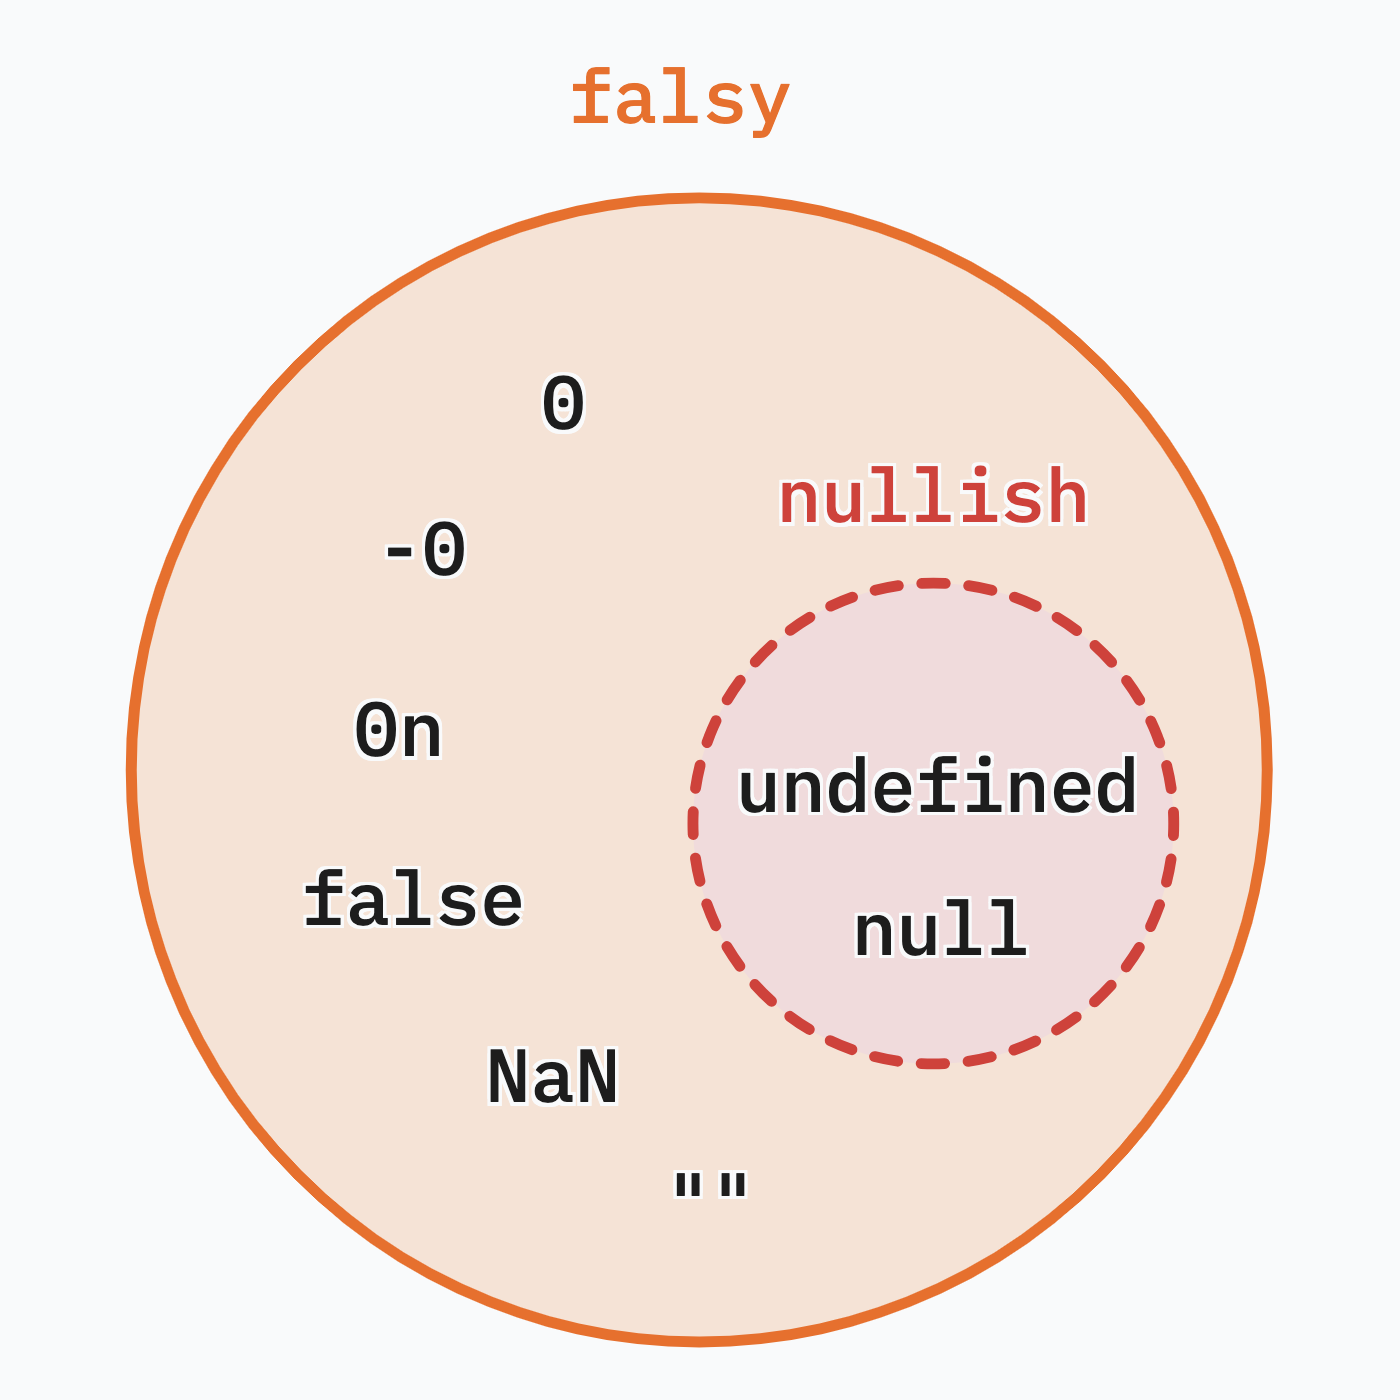 Nullish presented as a subset of falsy